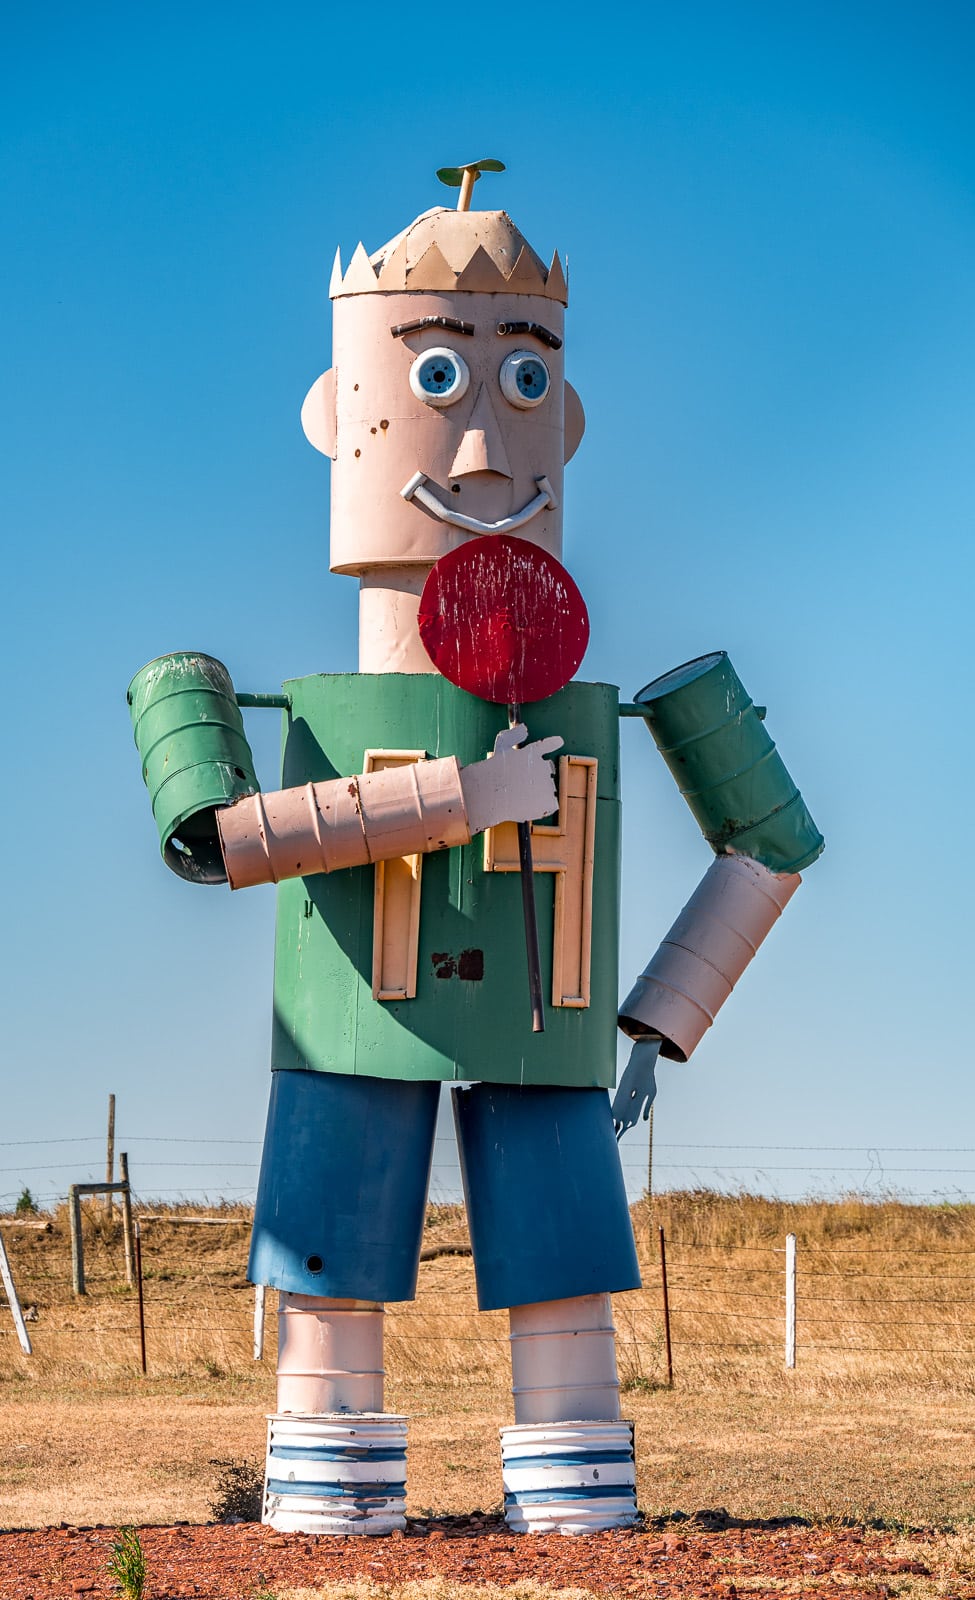 This is a head-to-toe statue of Junior in the sculpture by Gary Greff called The Tin Family. It is located along the Enchanted Highway running between I-94 and Regent, North Dakota.